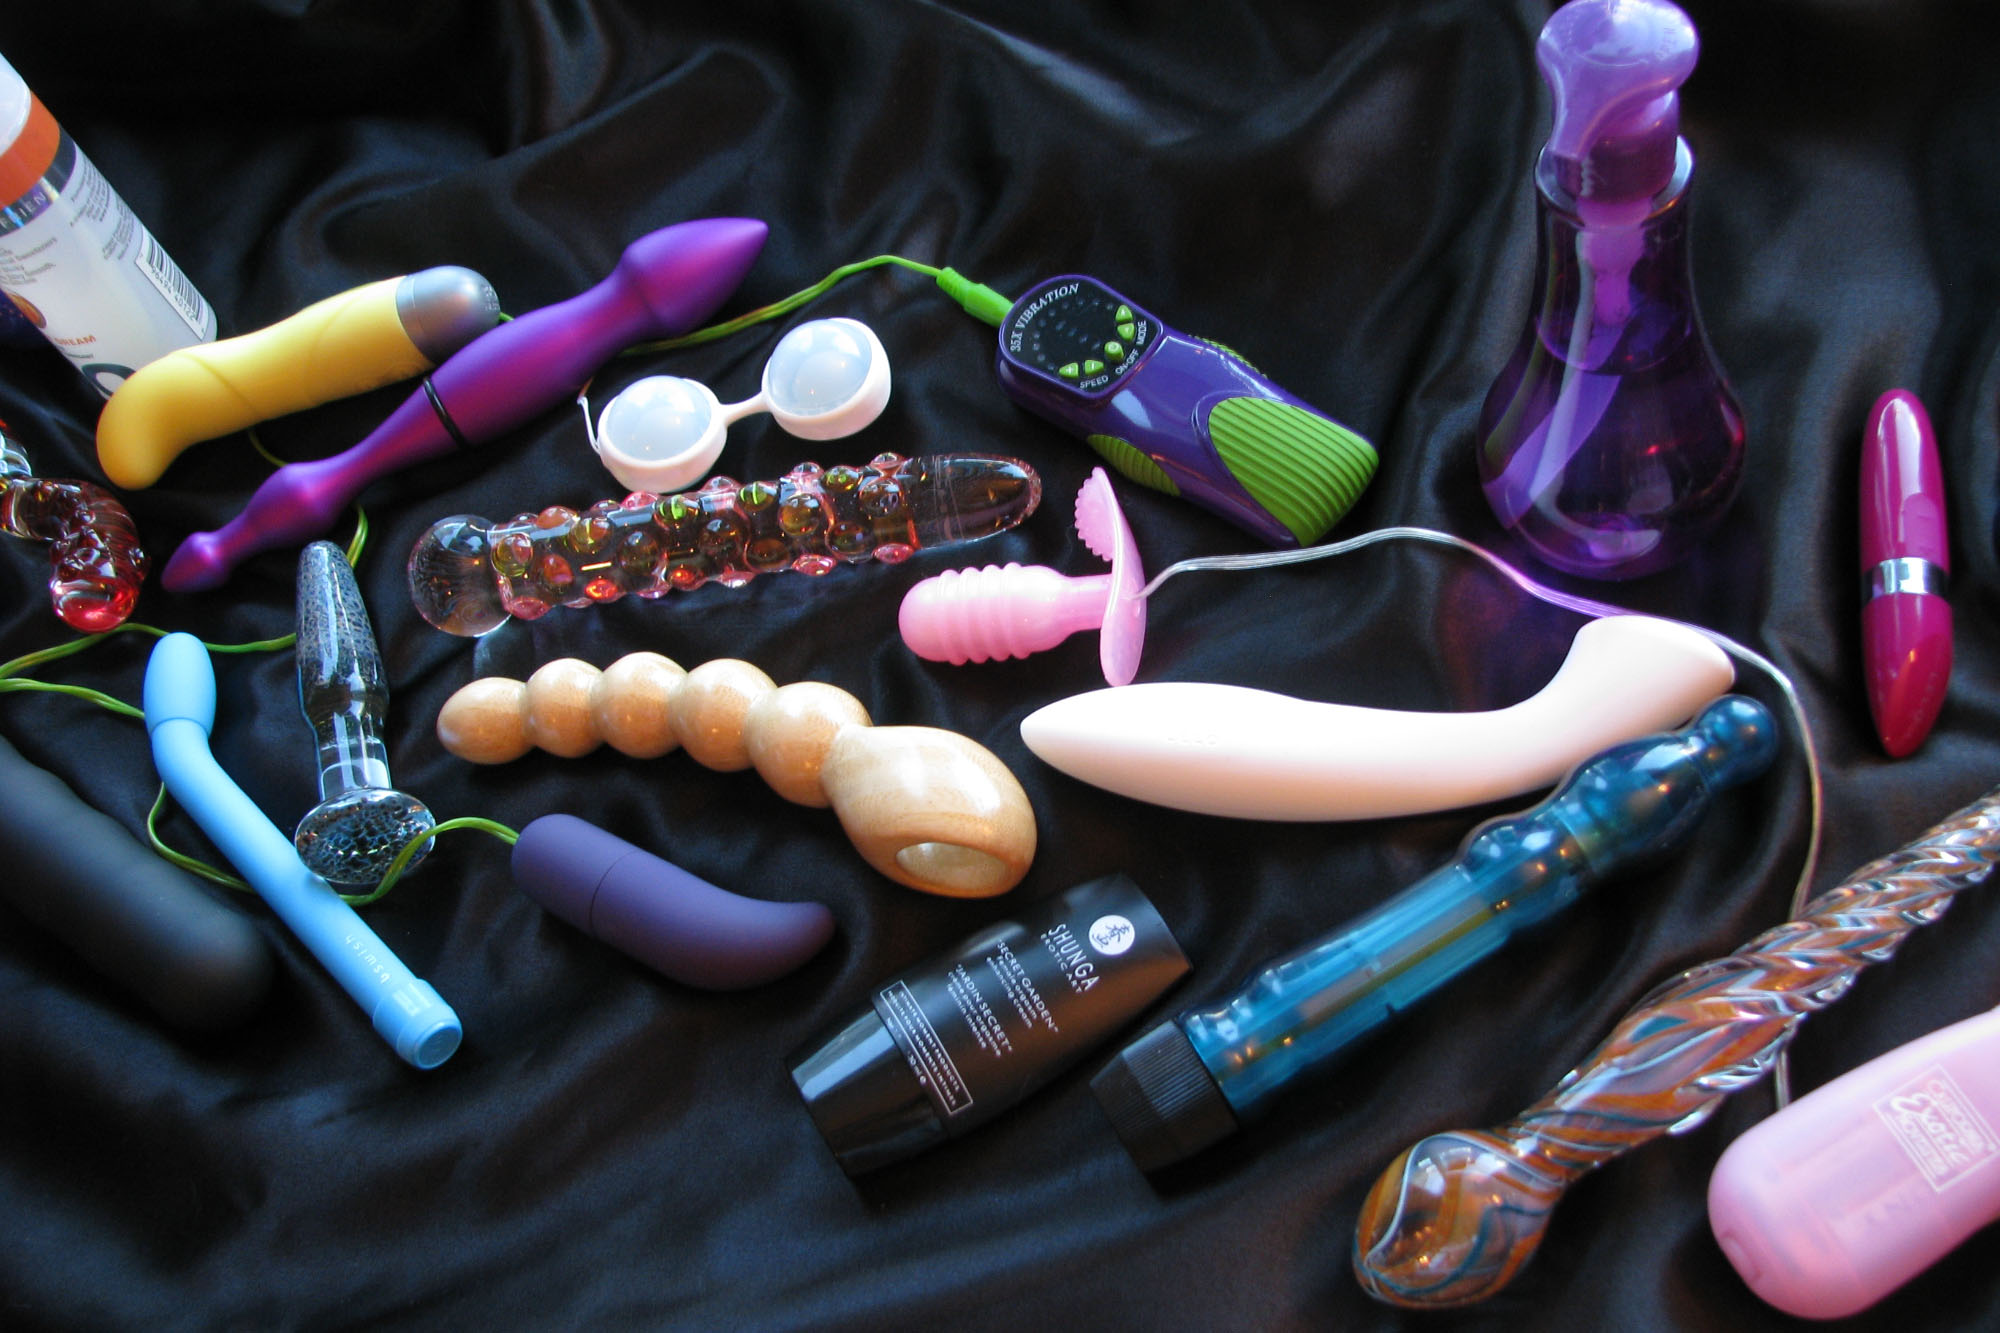 carina sifuentes recommends womanizer sex toy tumblr pic